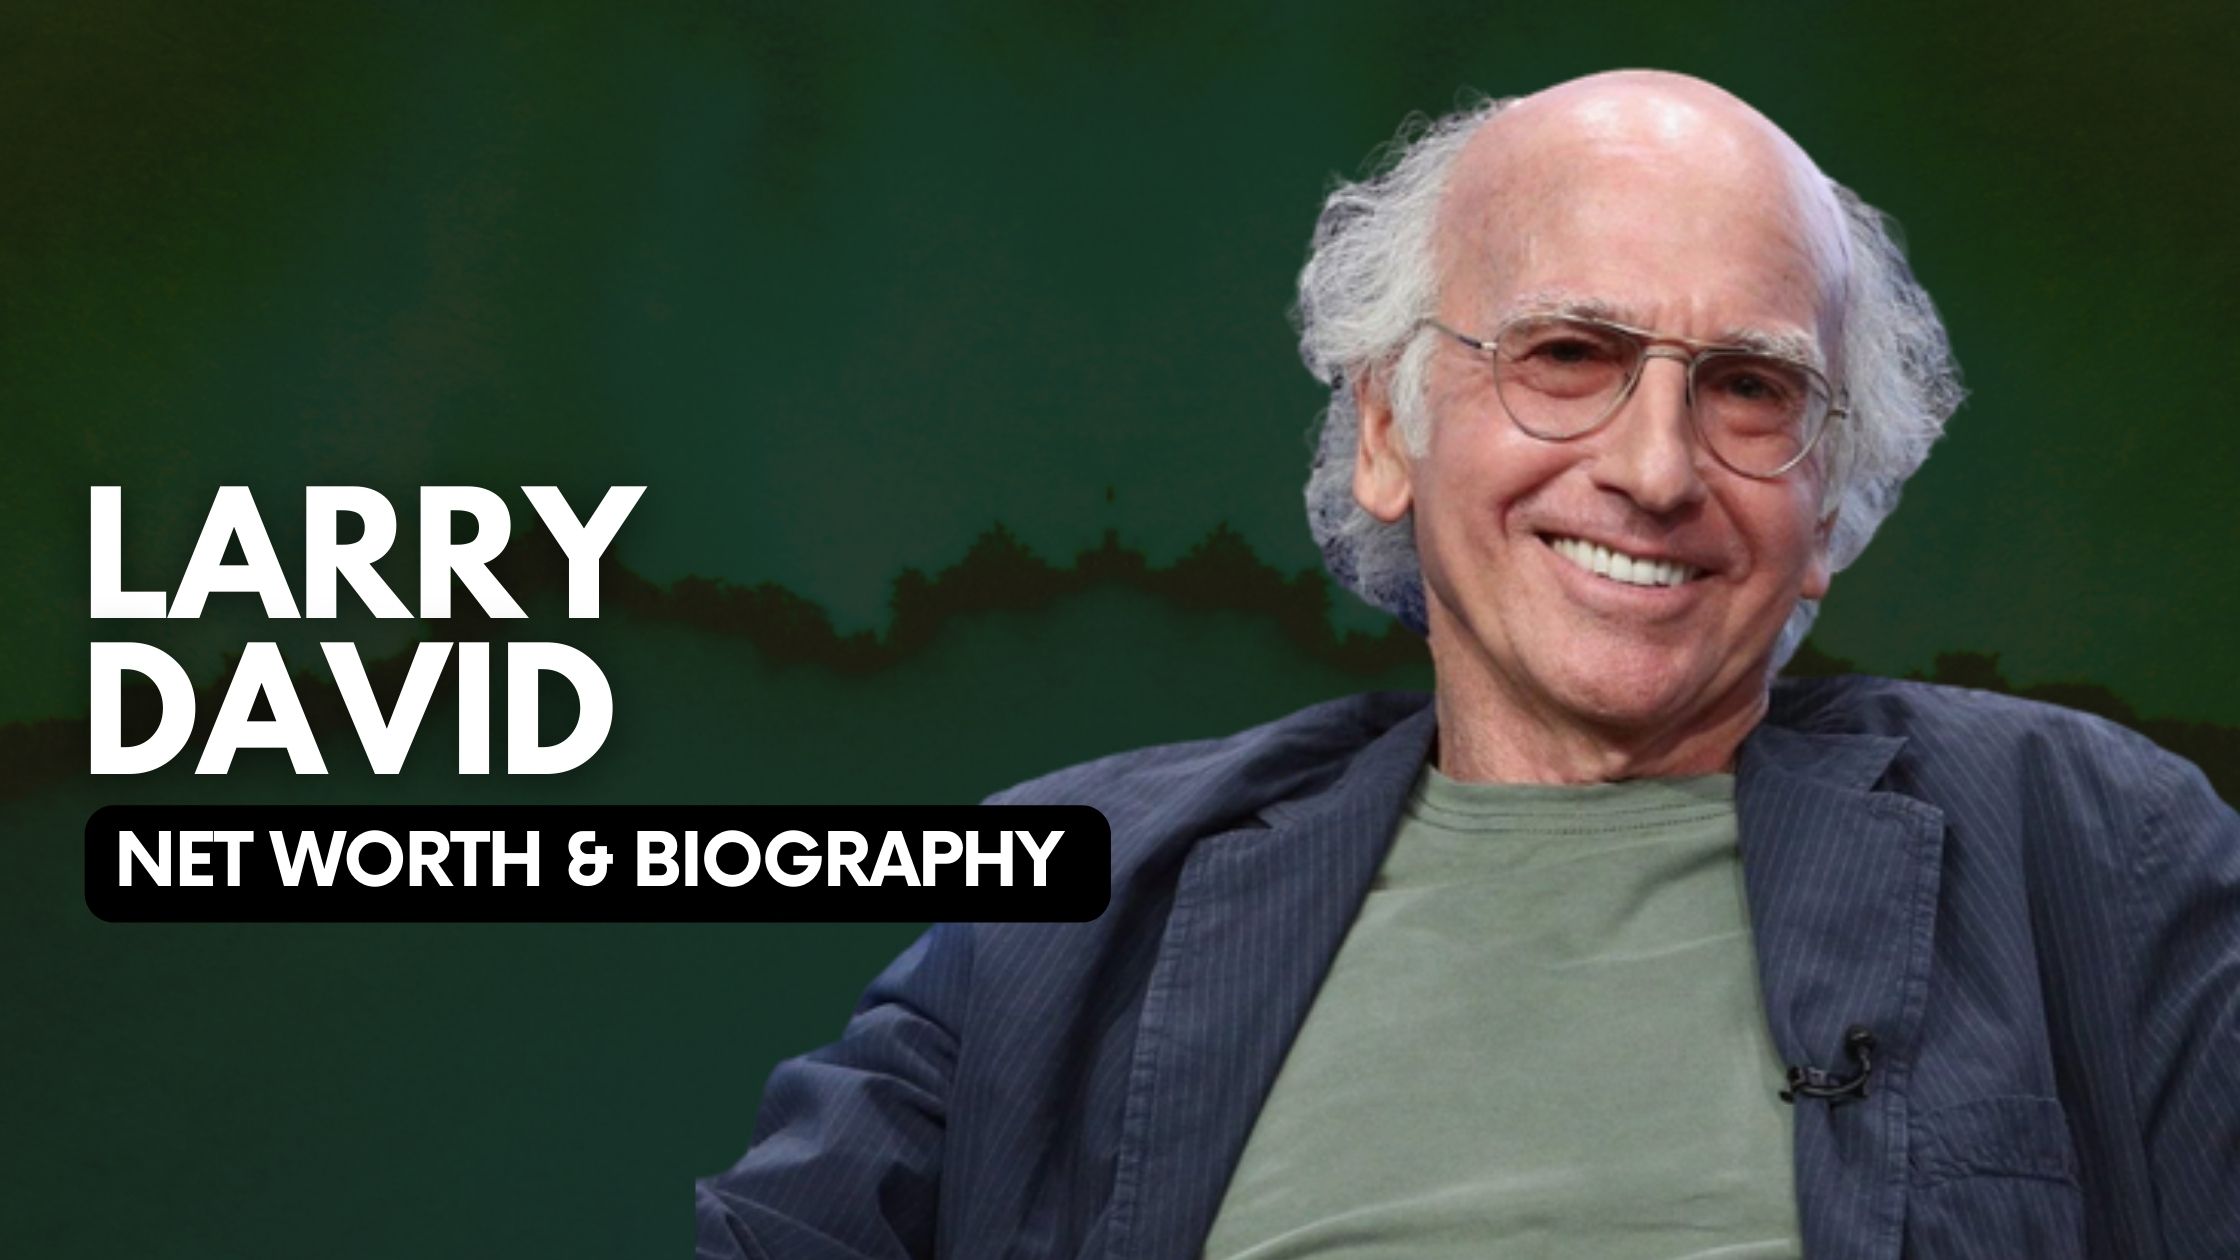 Larry David Net Worth and Biography